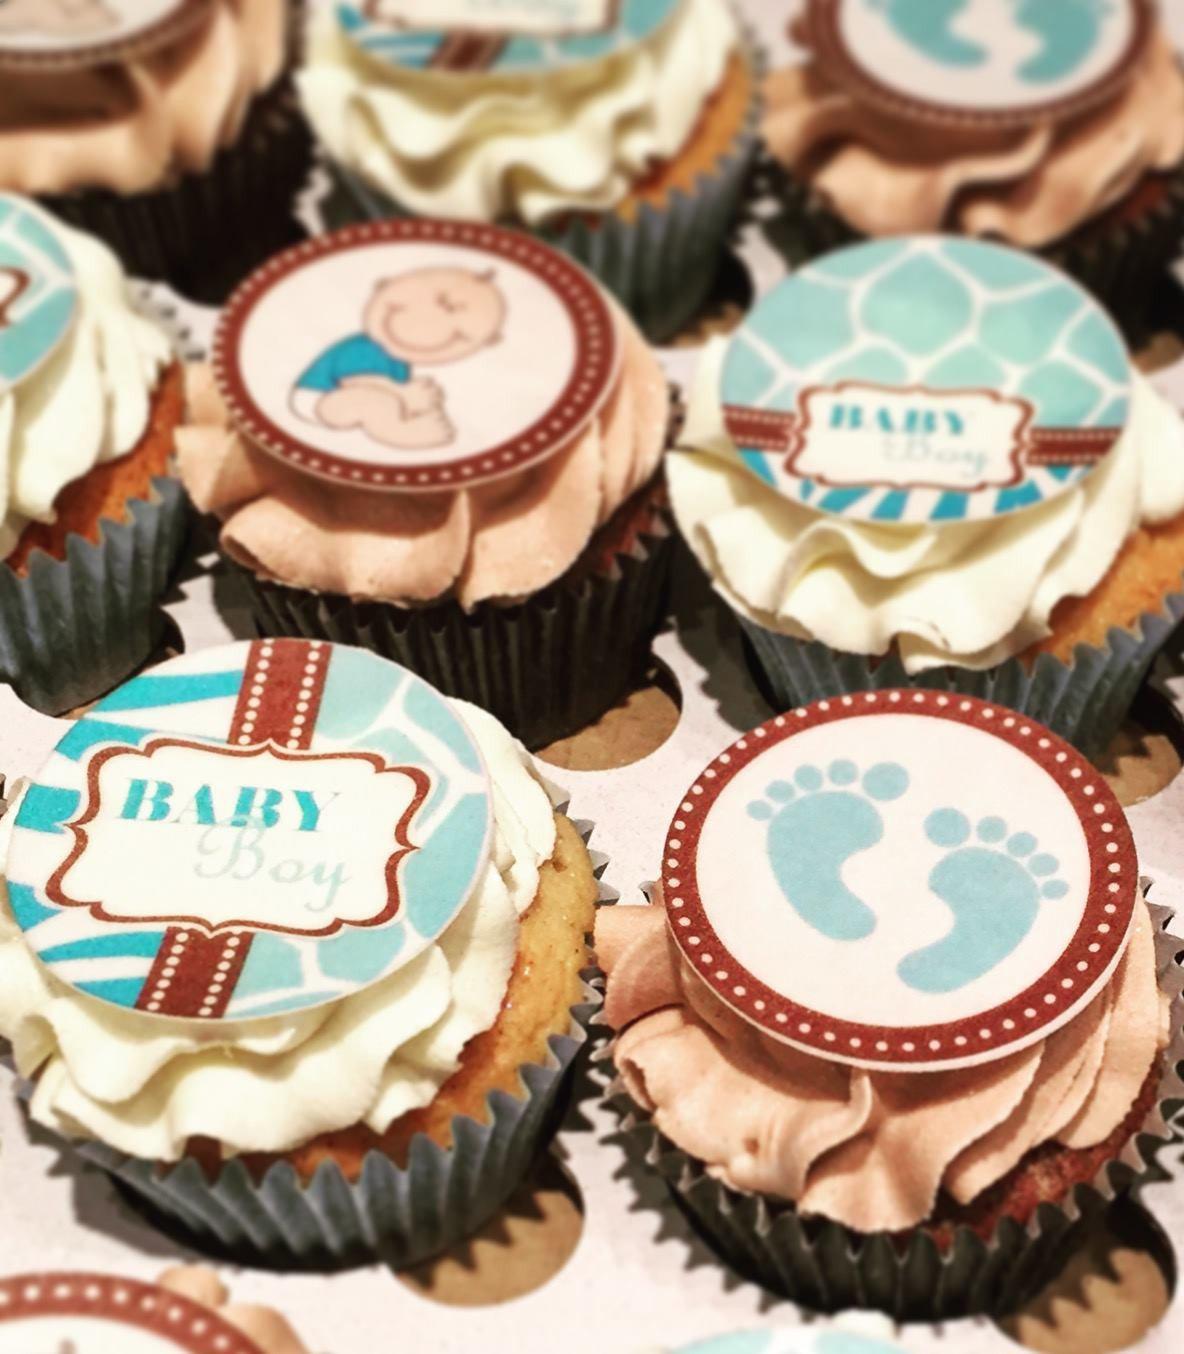 Printed edible cupcake toppers and cake toppers with baby boy images